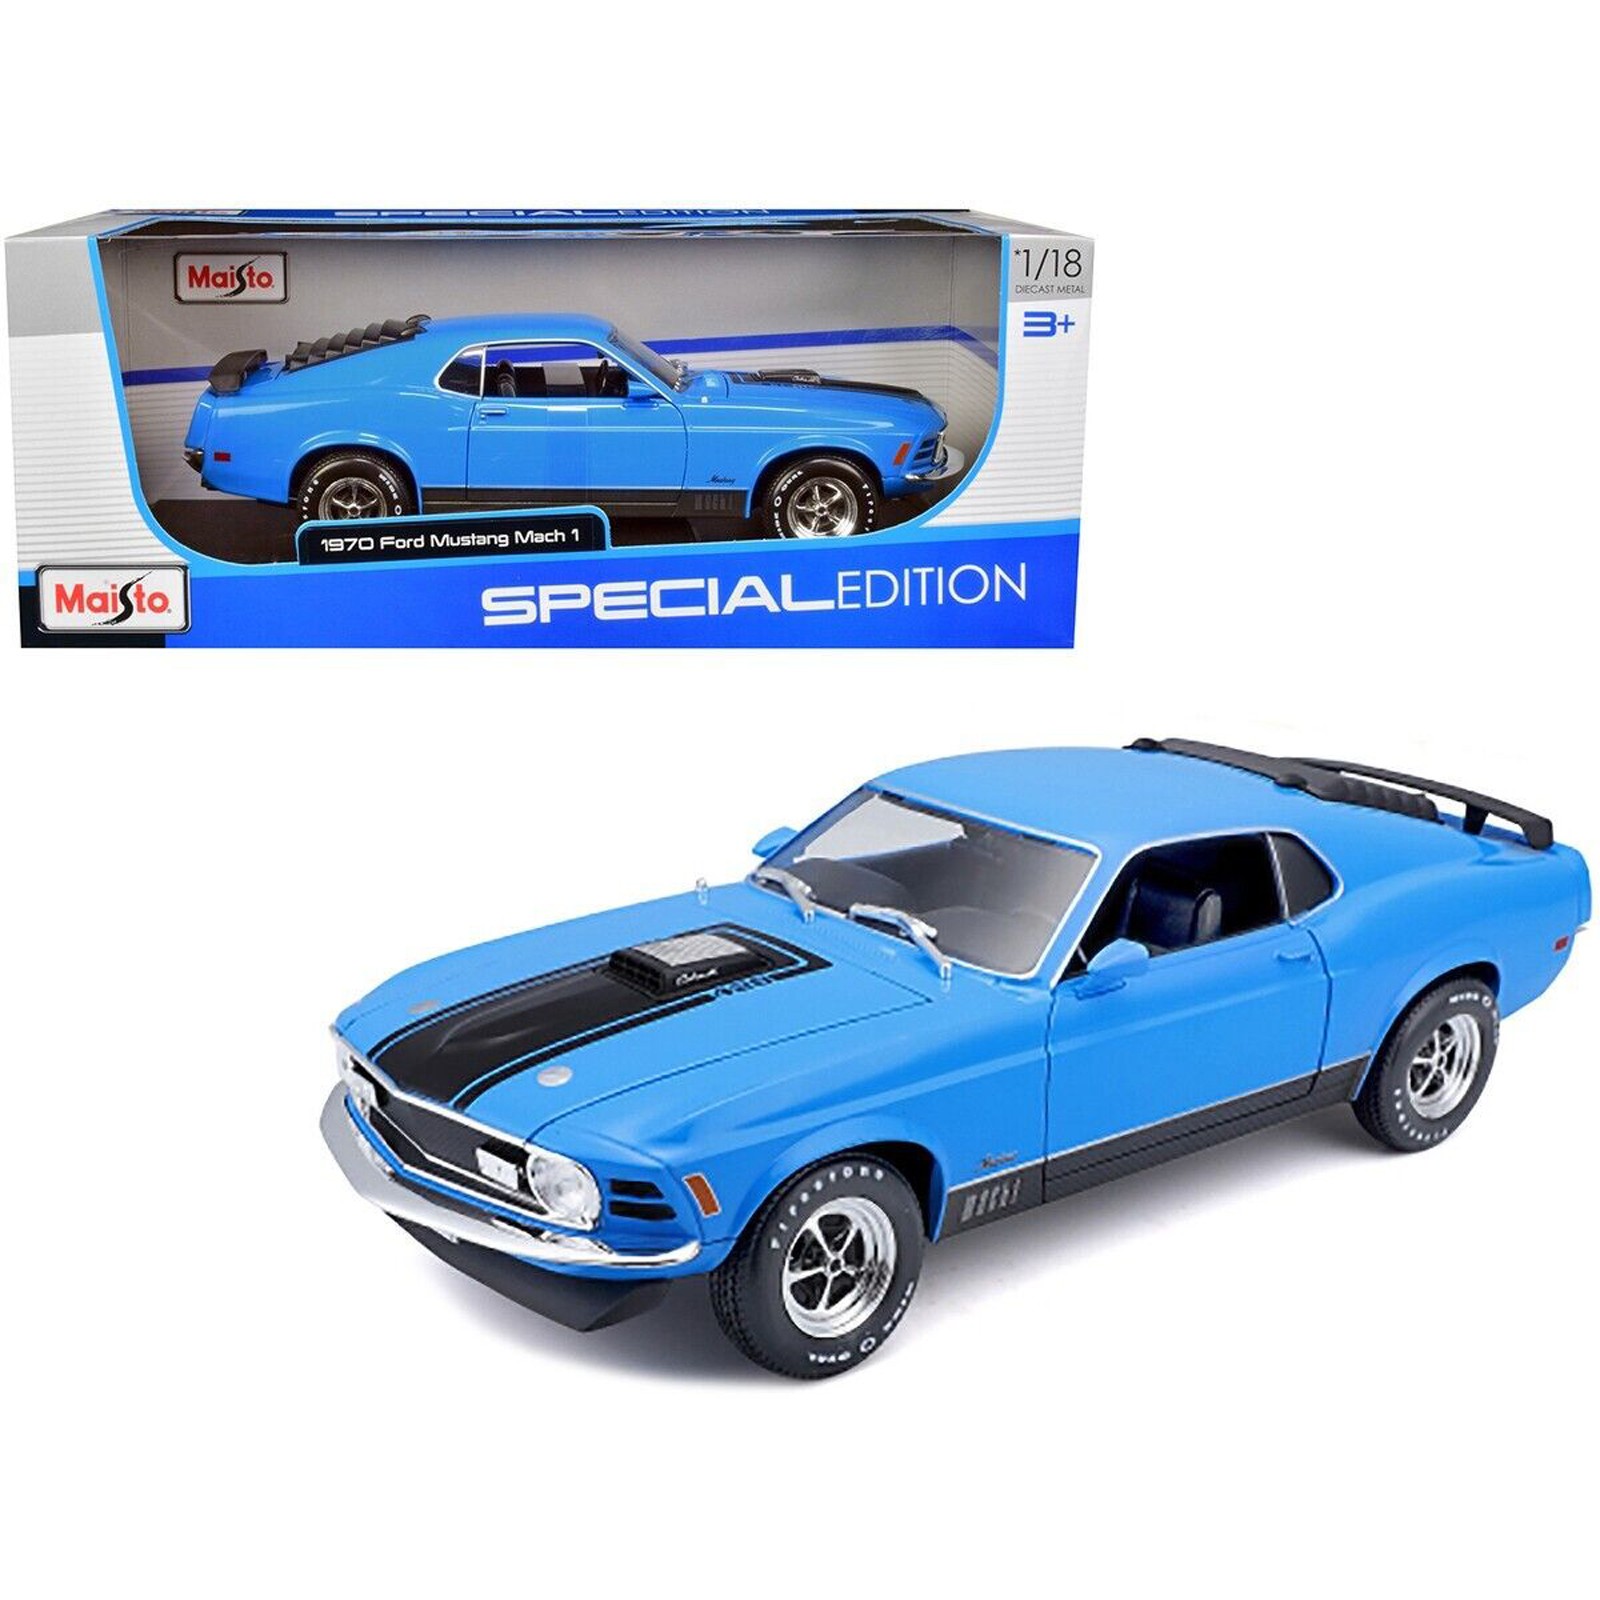 Maisto 1:18 Special Edition 2019 Ford GT